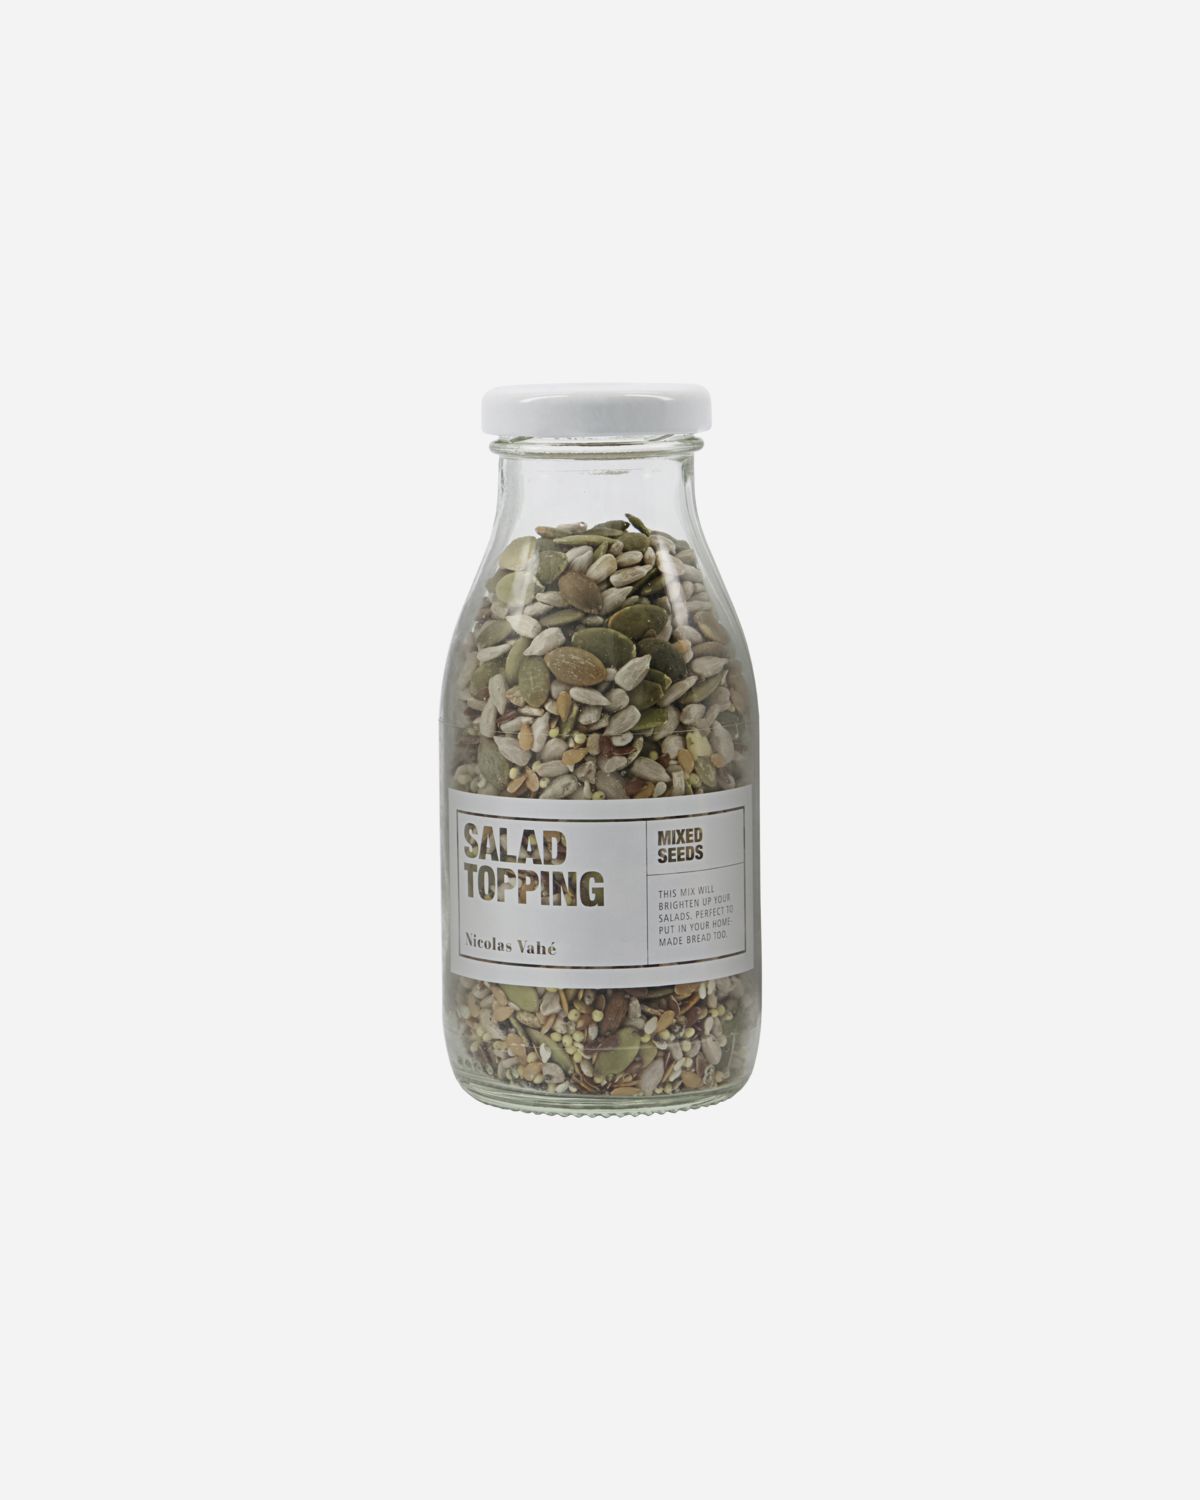 Salad topping, mixed seeds, 170 g.